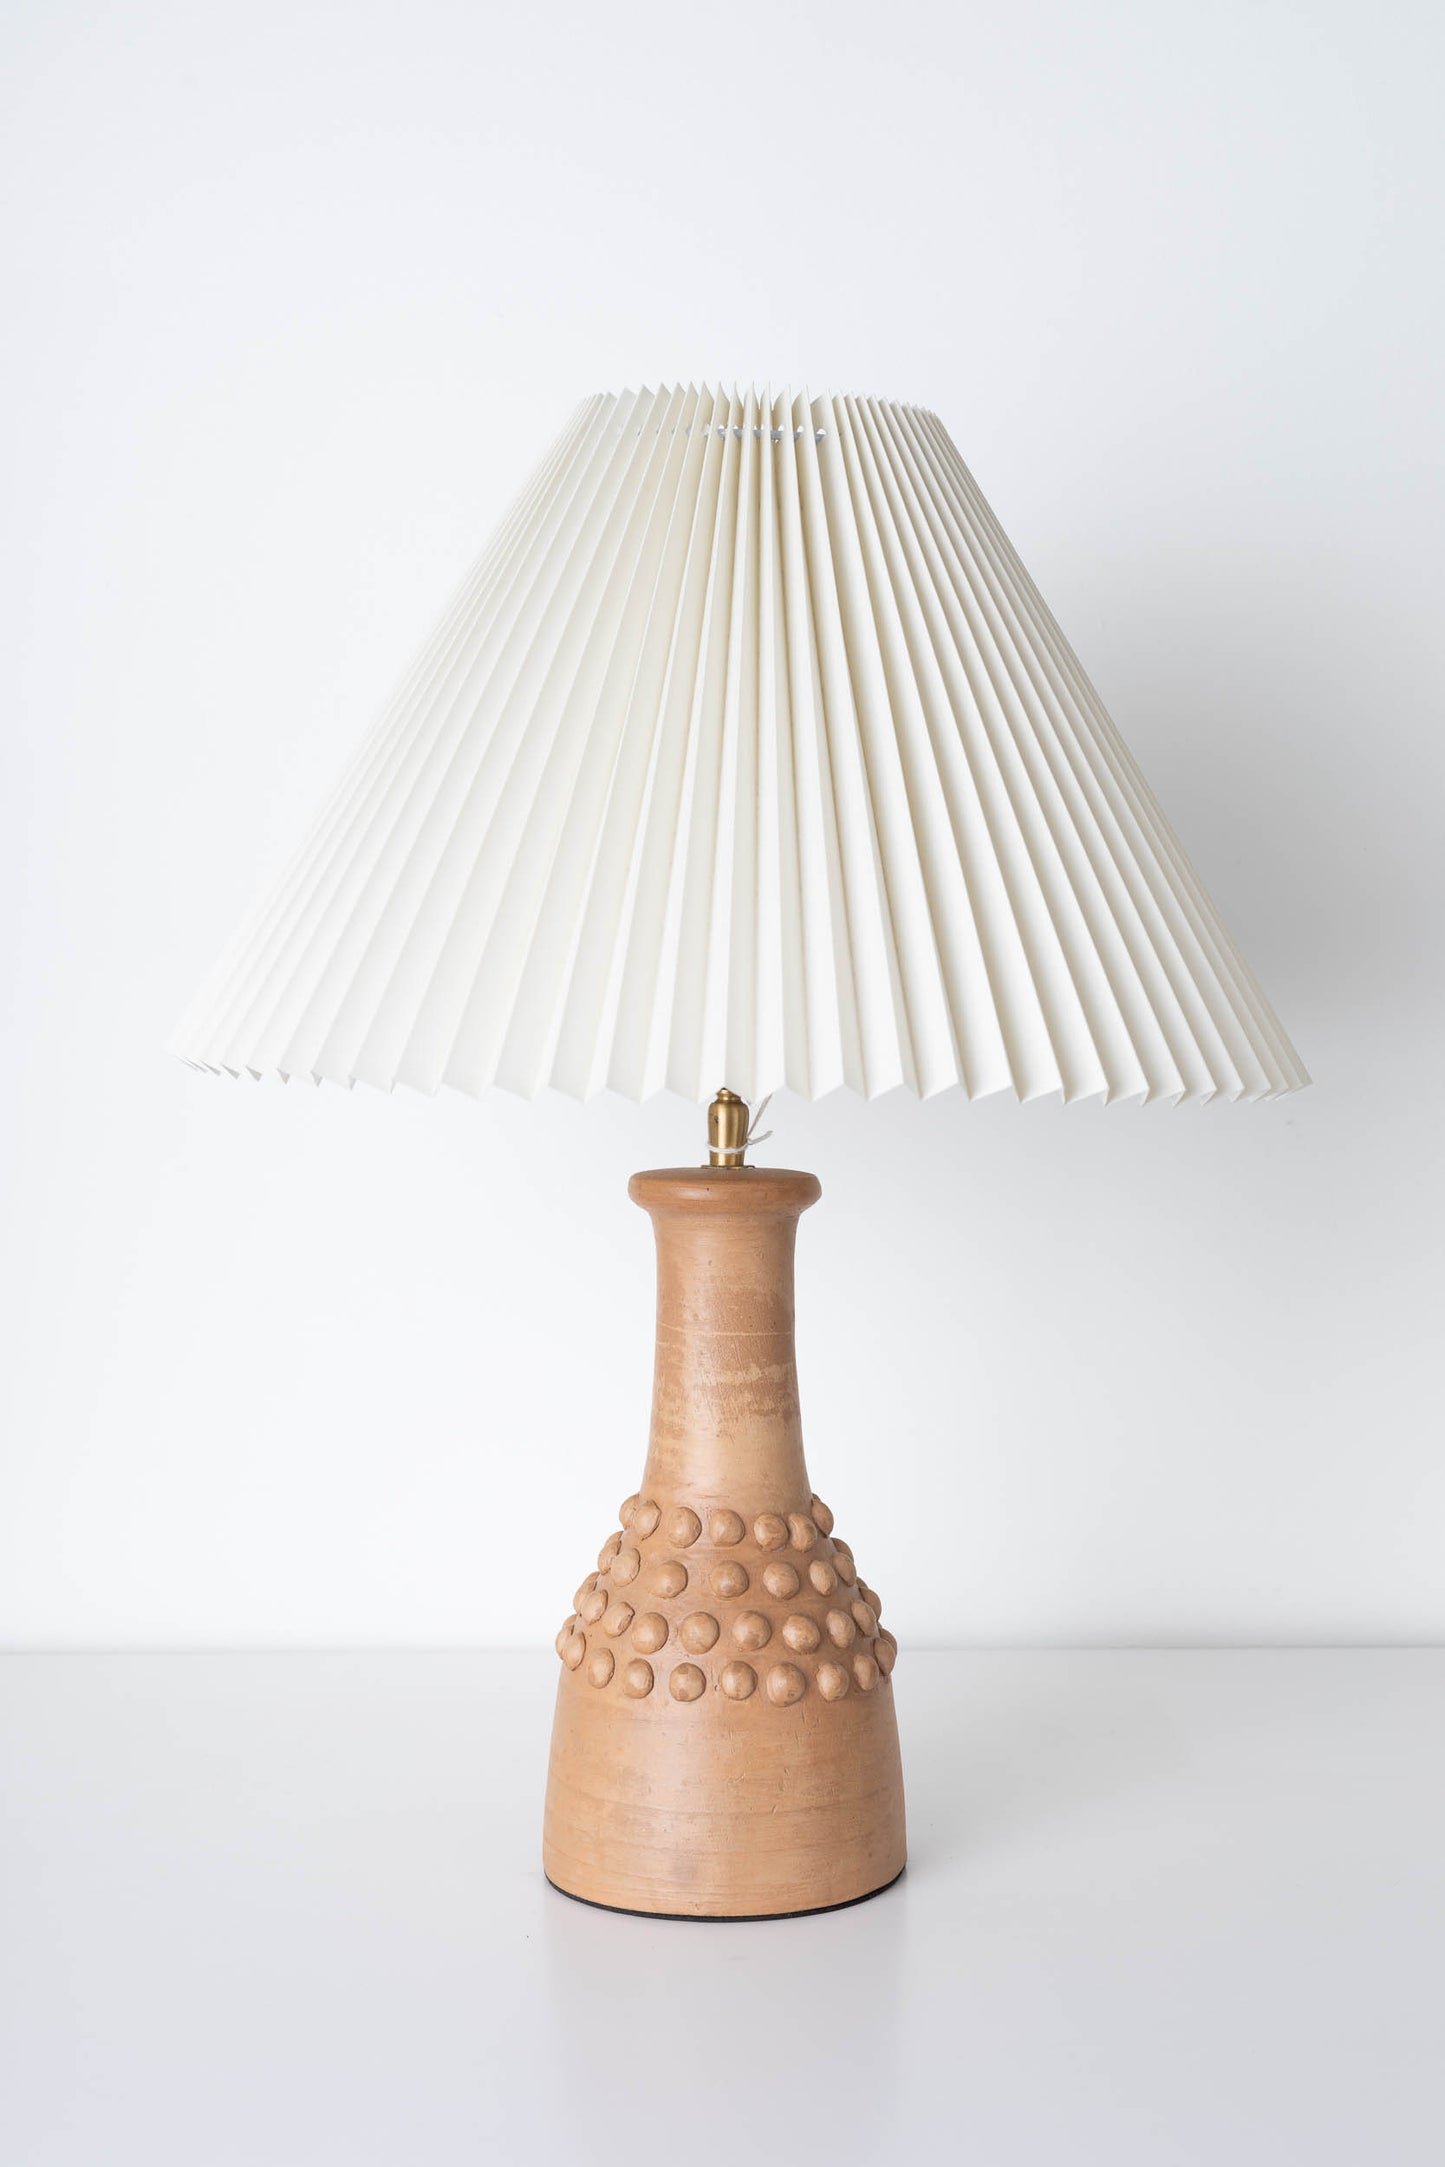 Terracotta Table Lamp w/ Pleated Lamp Shade